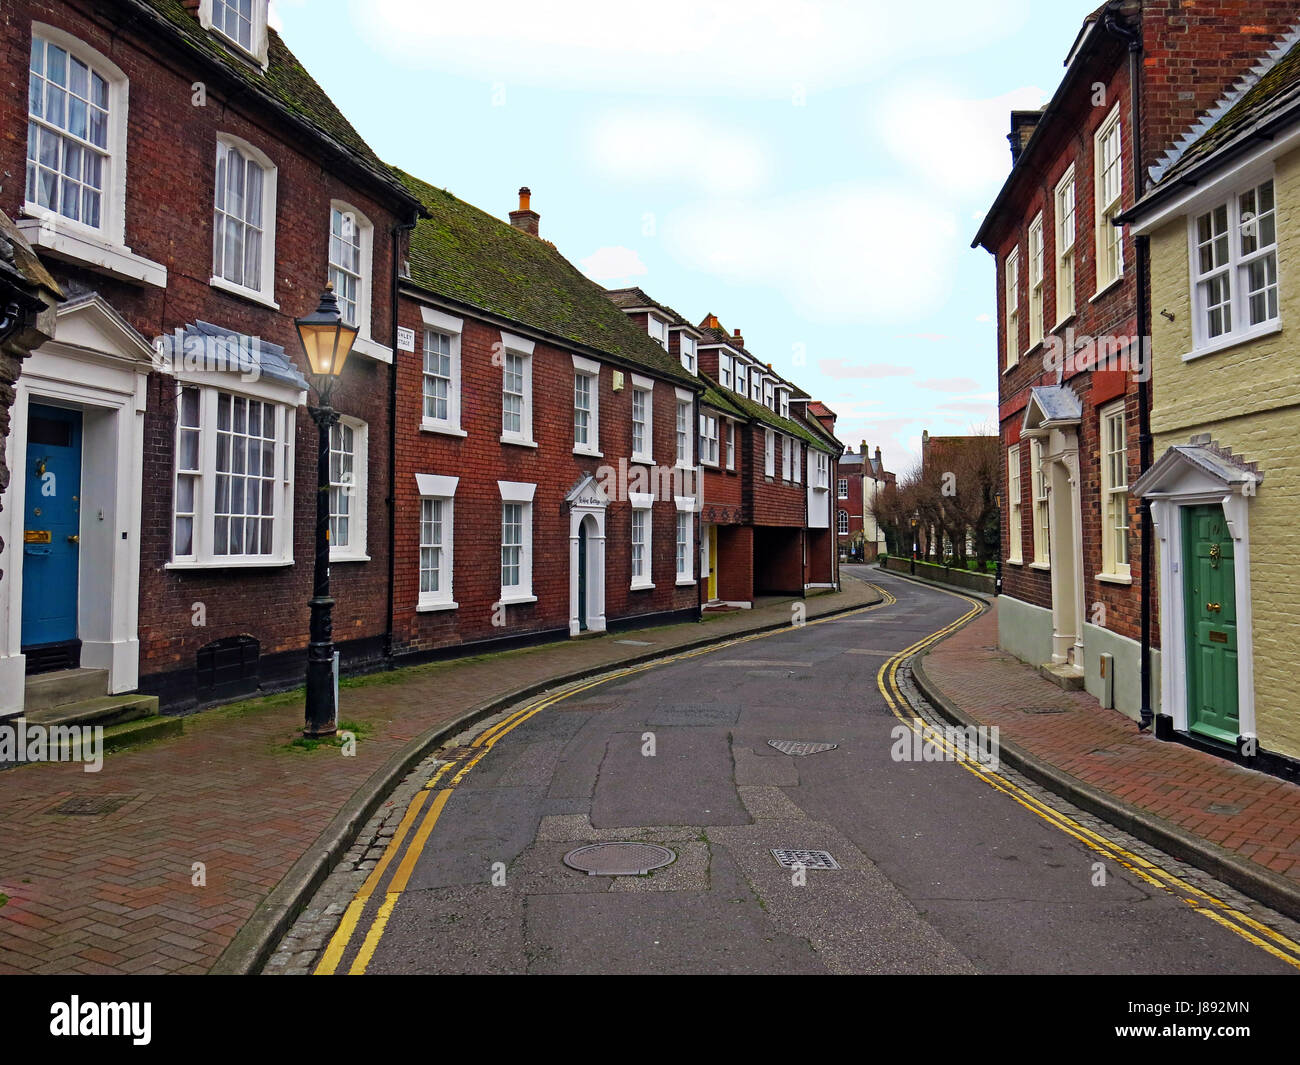 Church Street in the Old Town district of Poole, Dorset, England Stock Photo